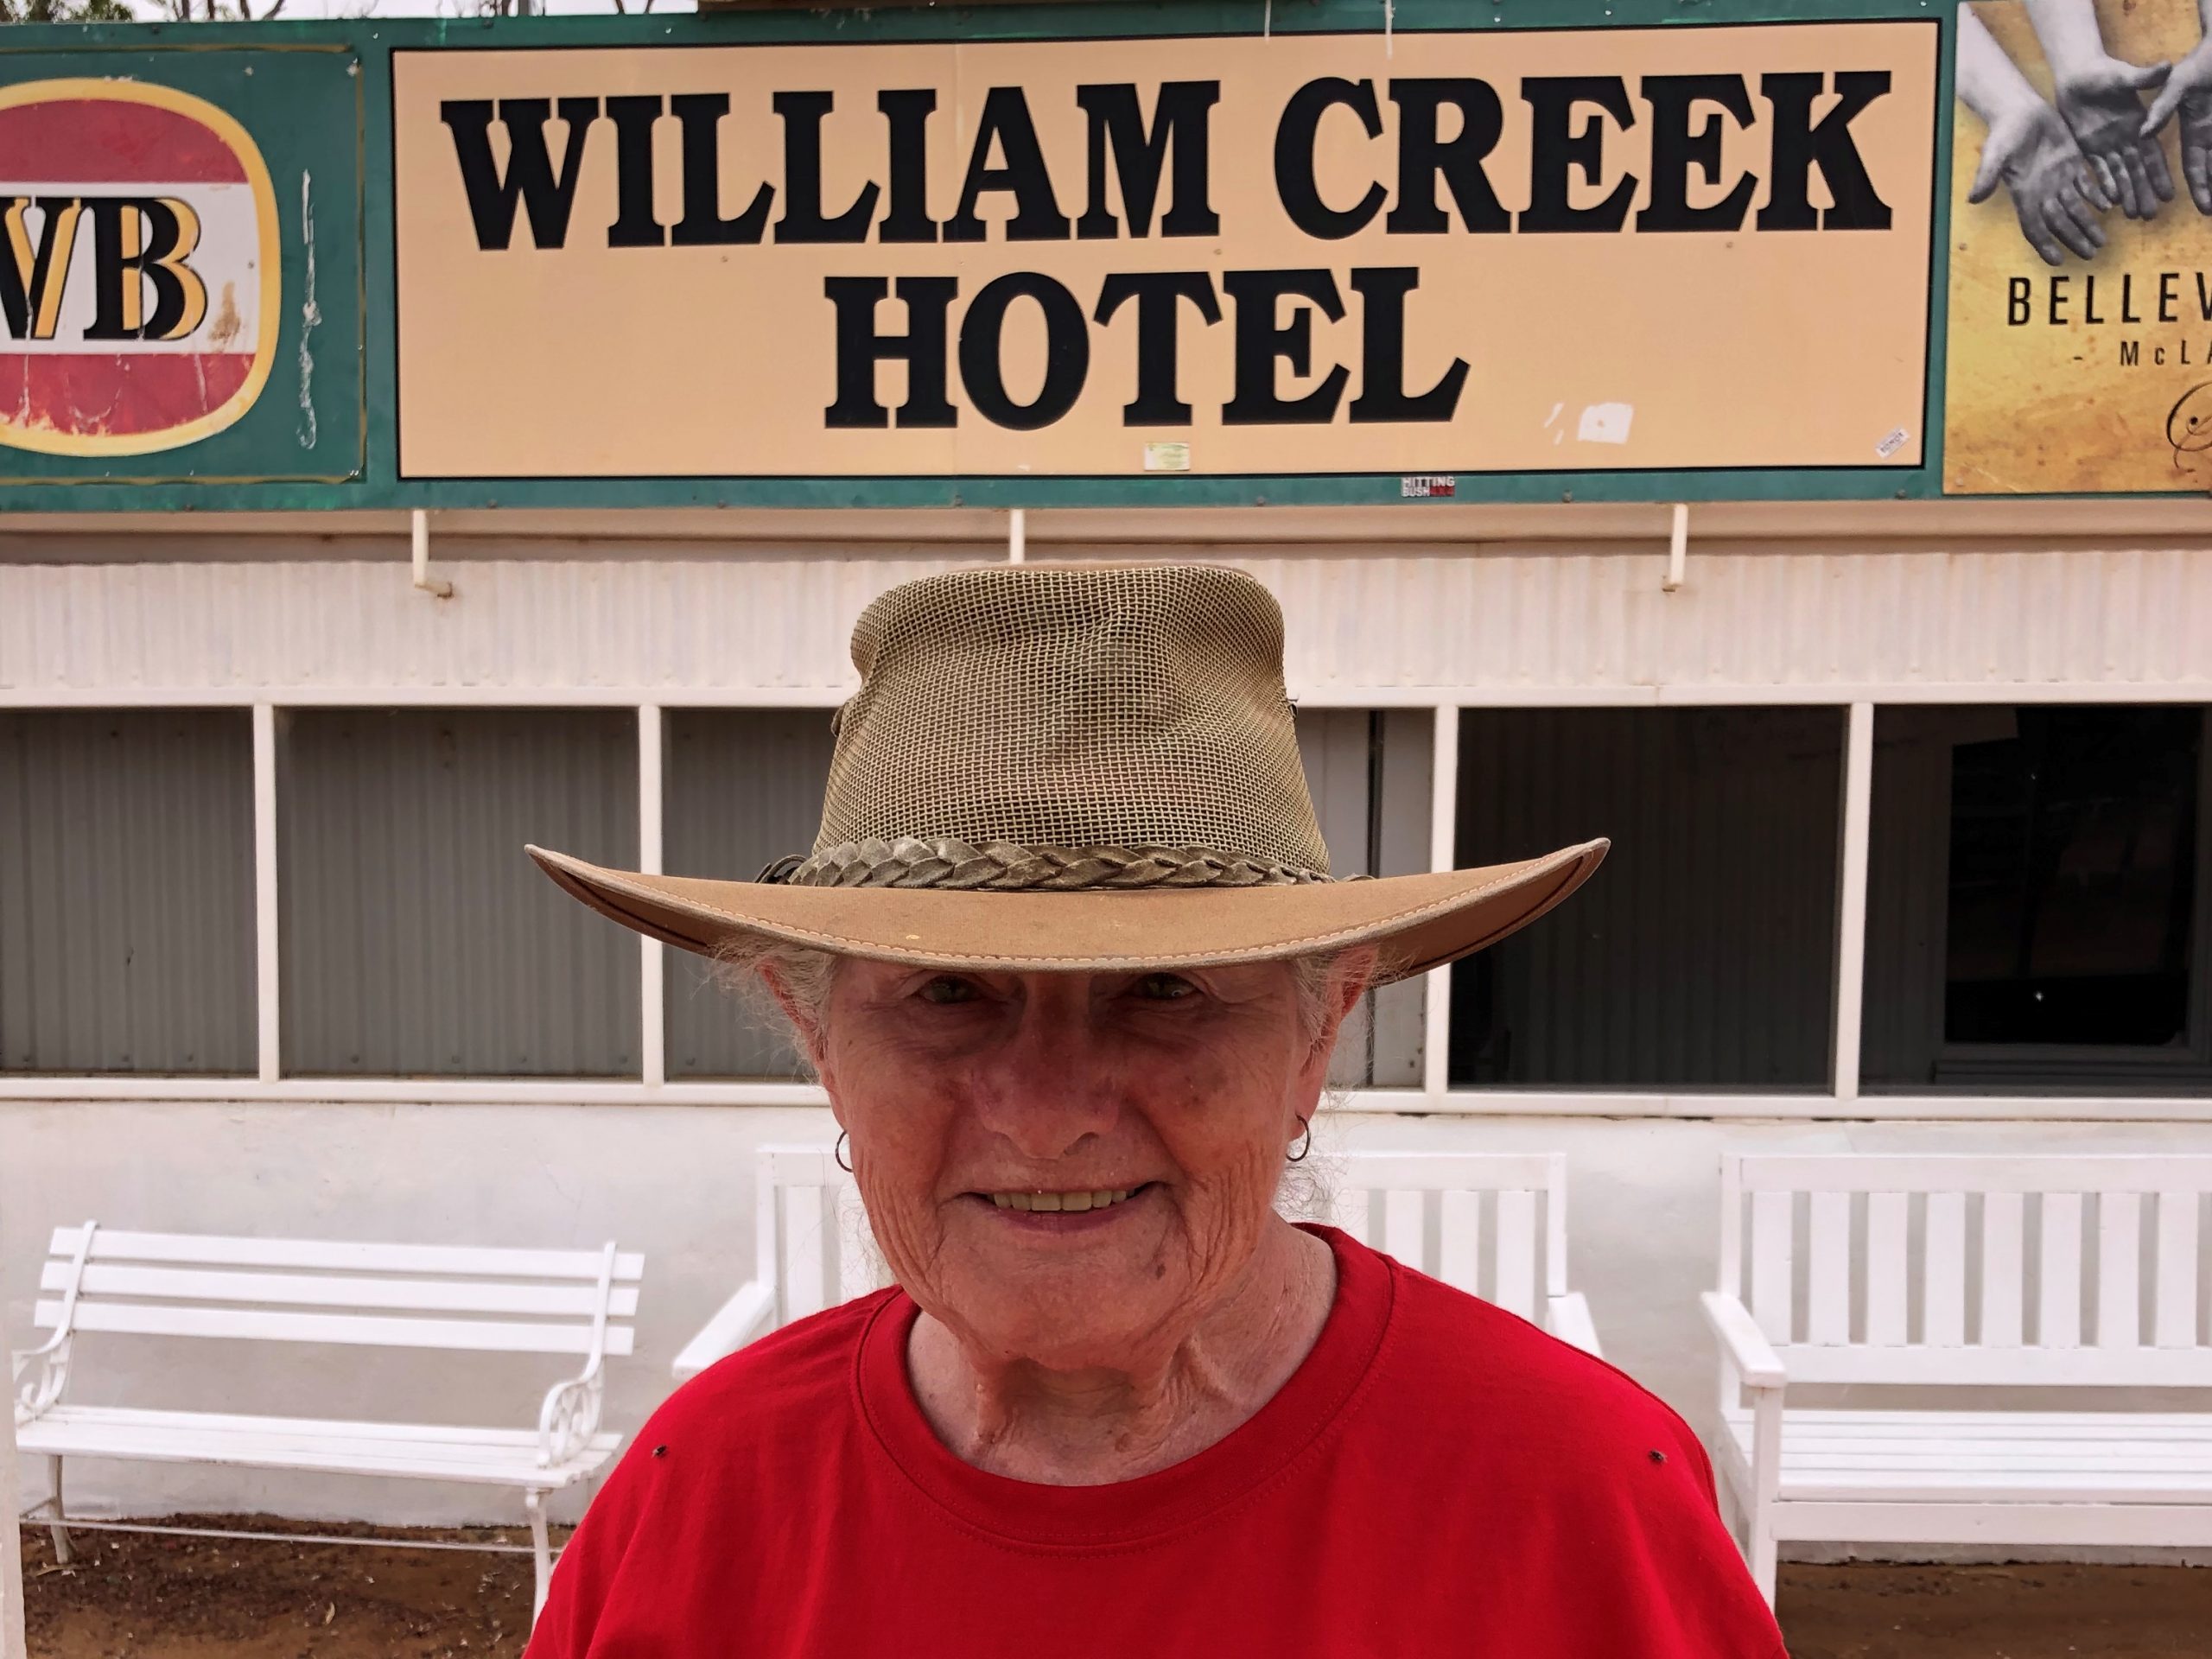 Bobbie Perkins on her recent Outback Links Volunteer placement at William Creek